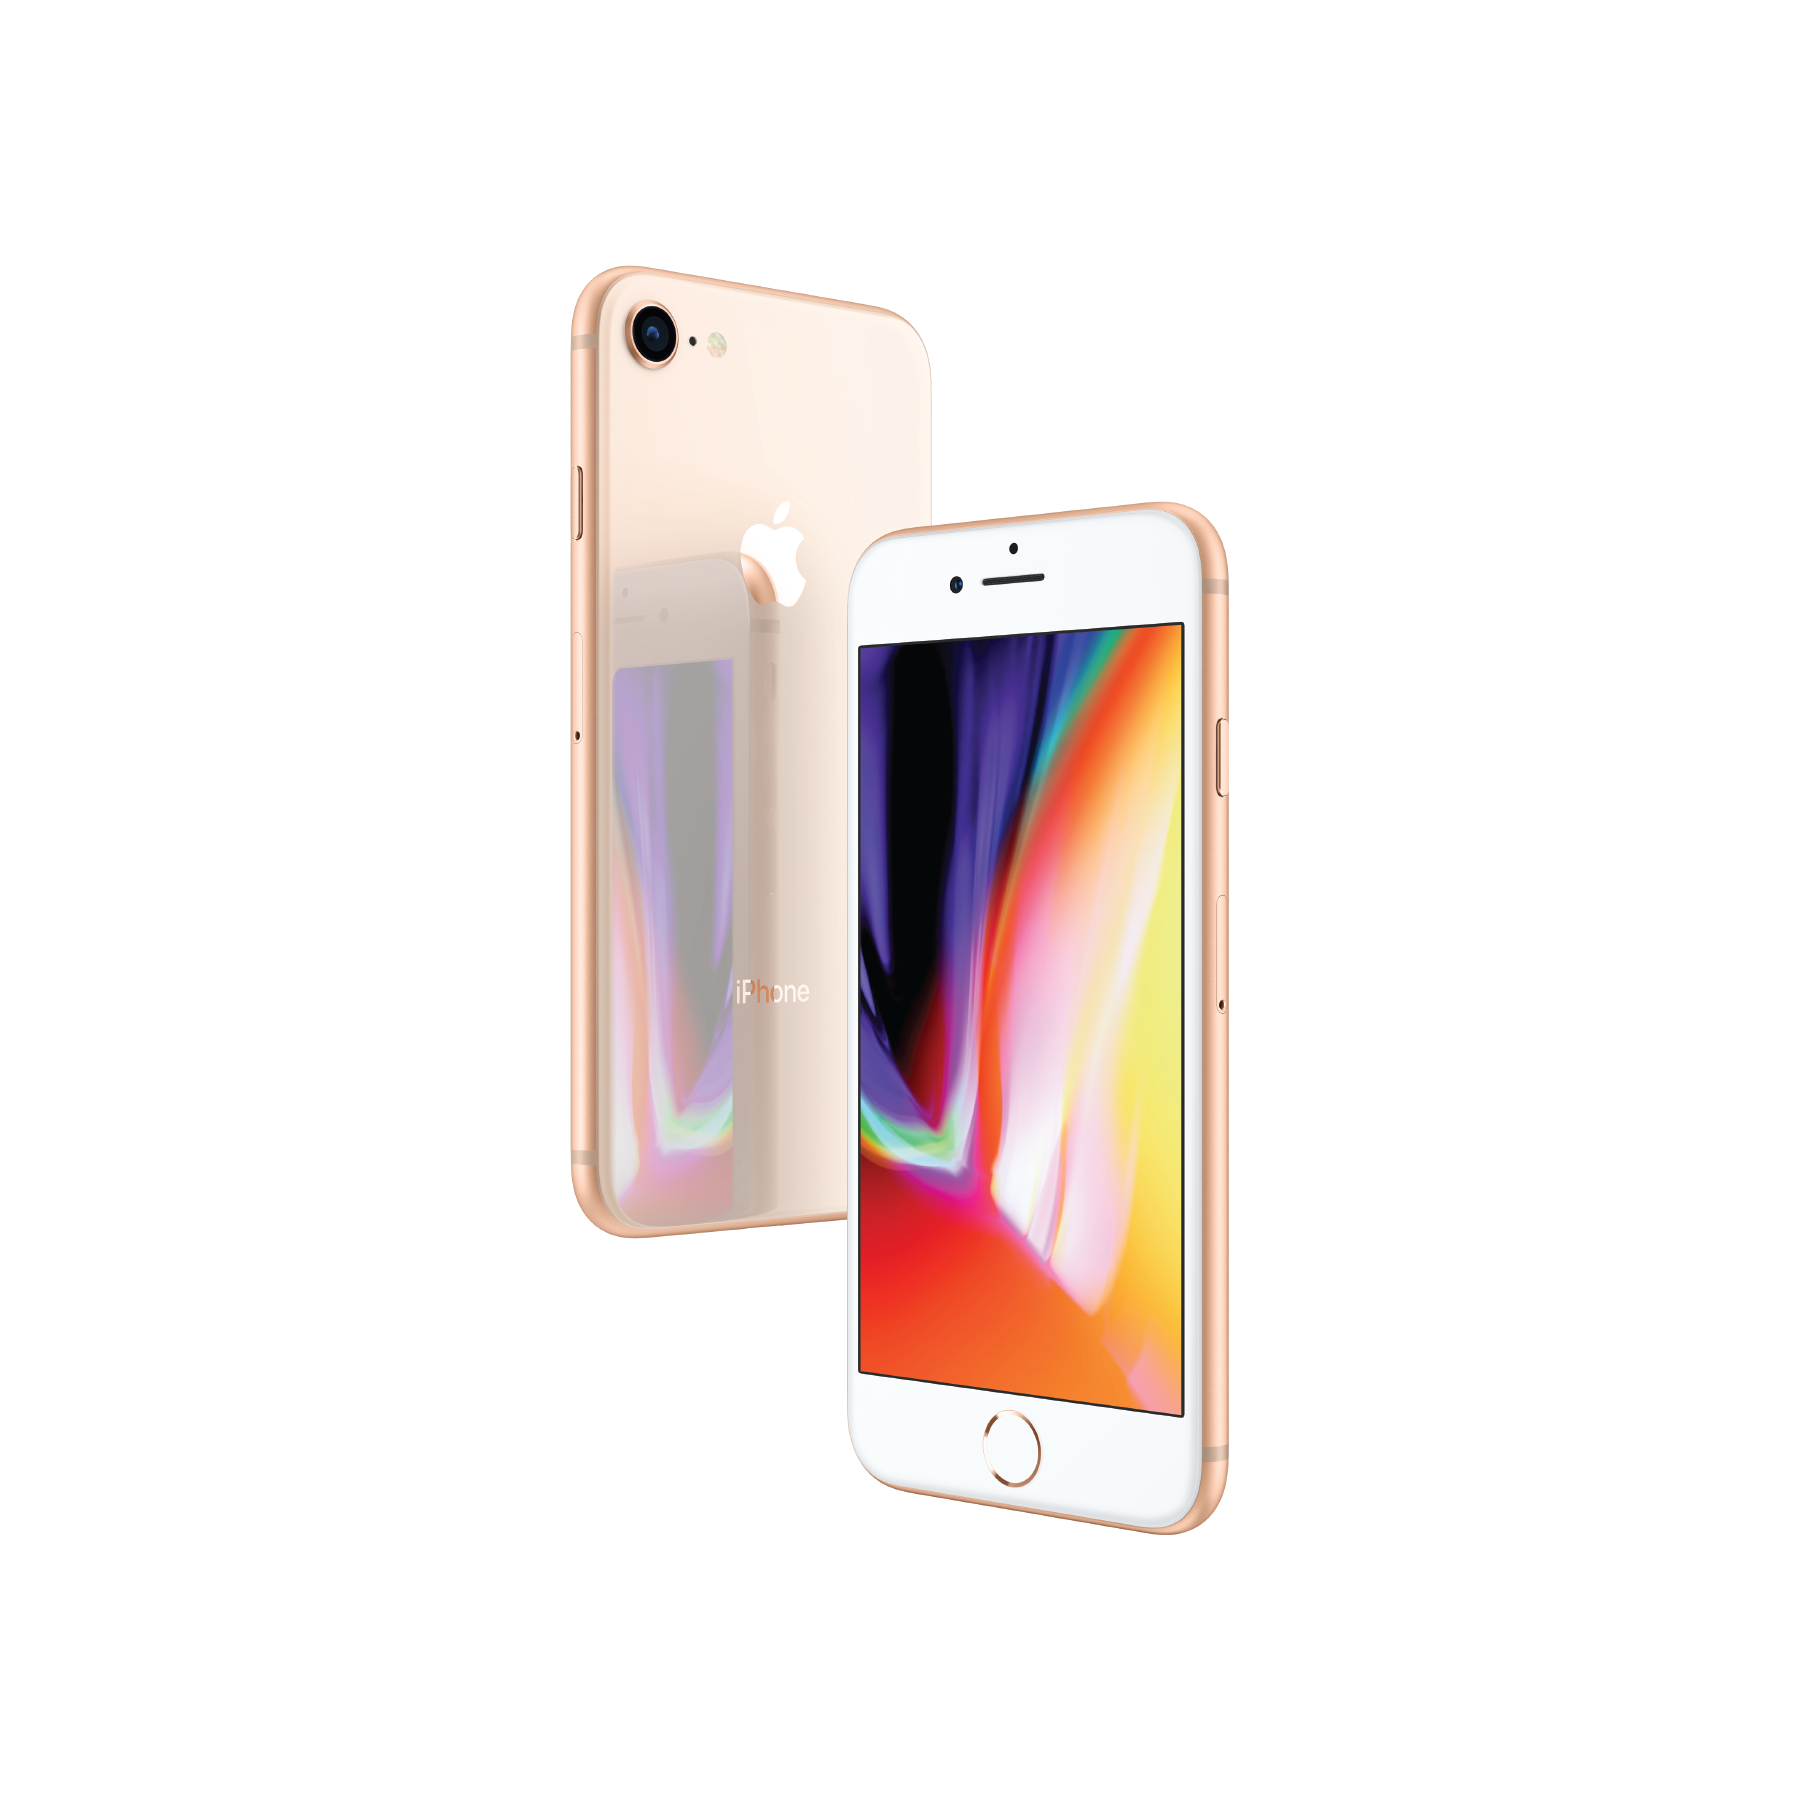 Buy Used iPhone 8 | iStore Pre-owned | Certified Second Hand iPhone 8's